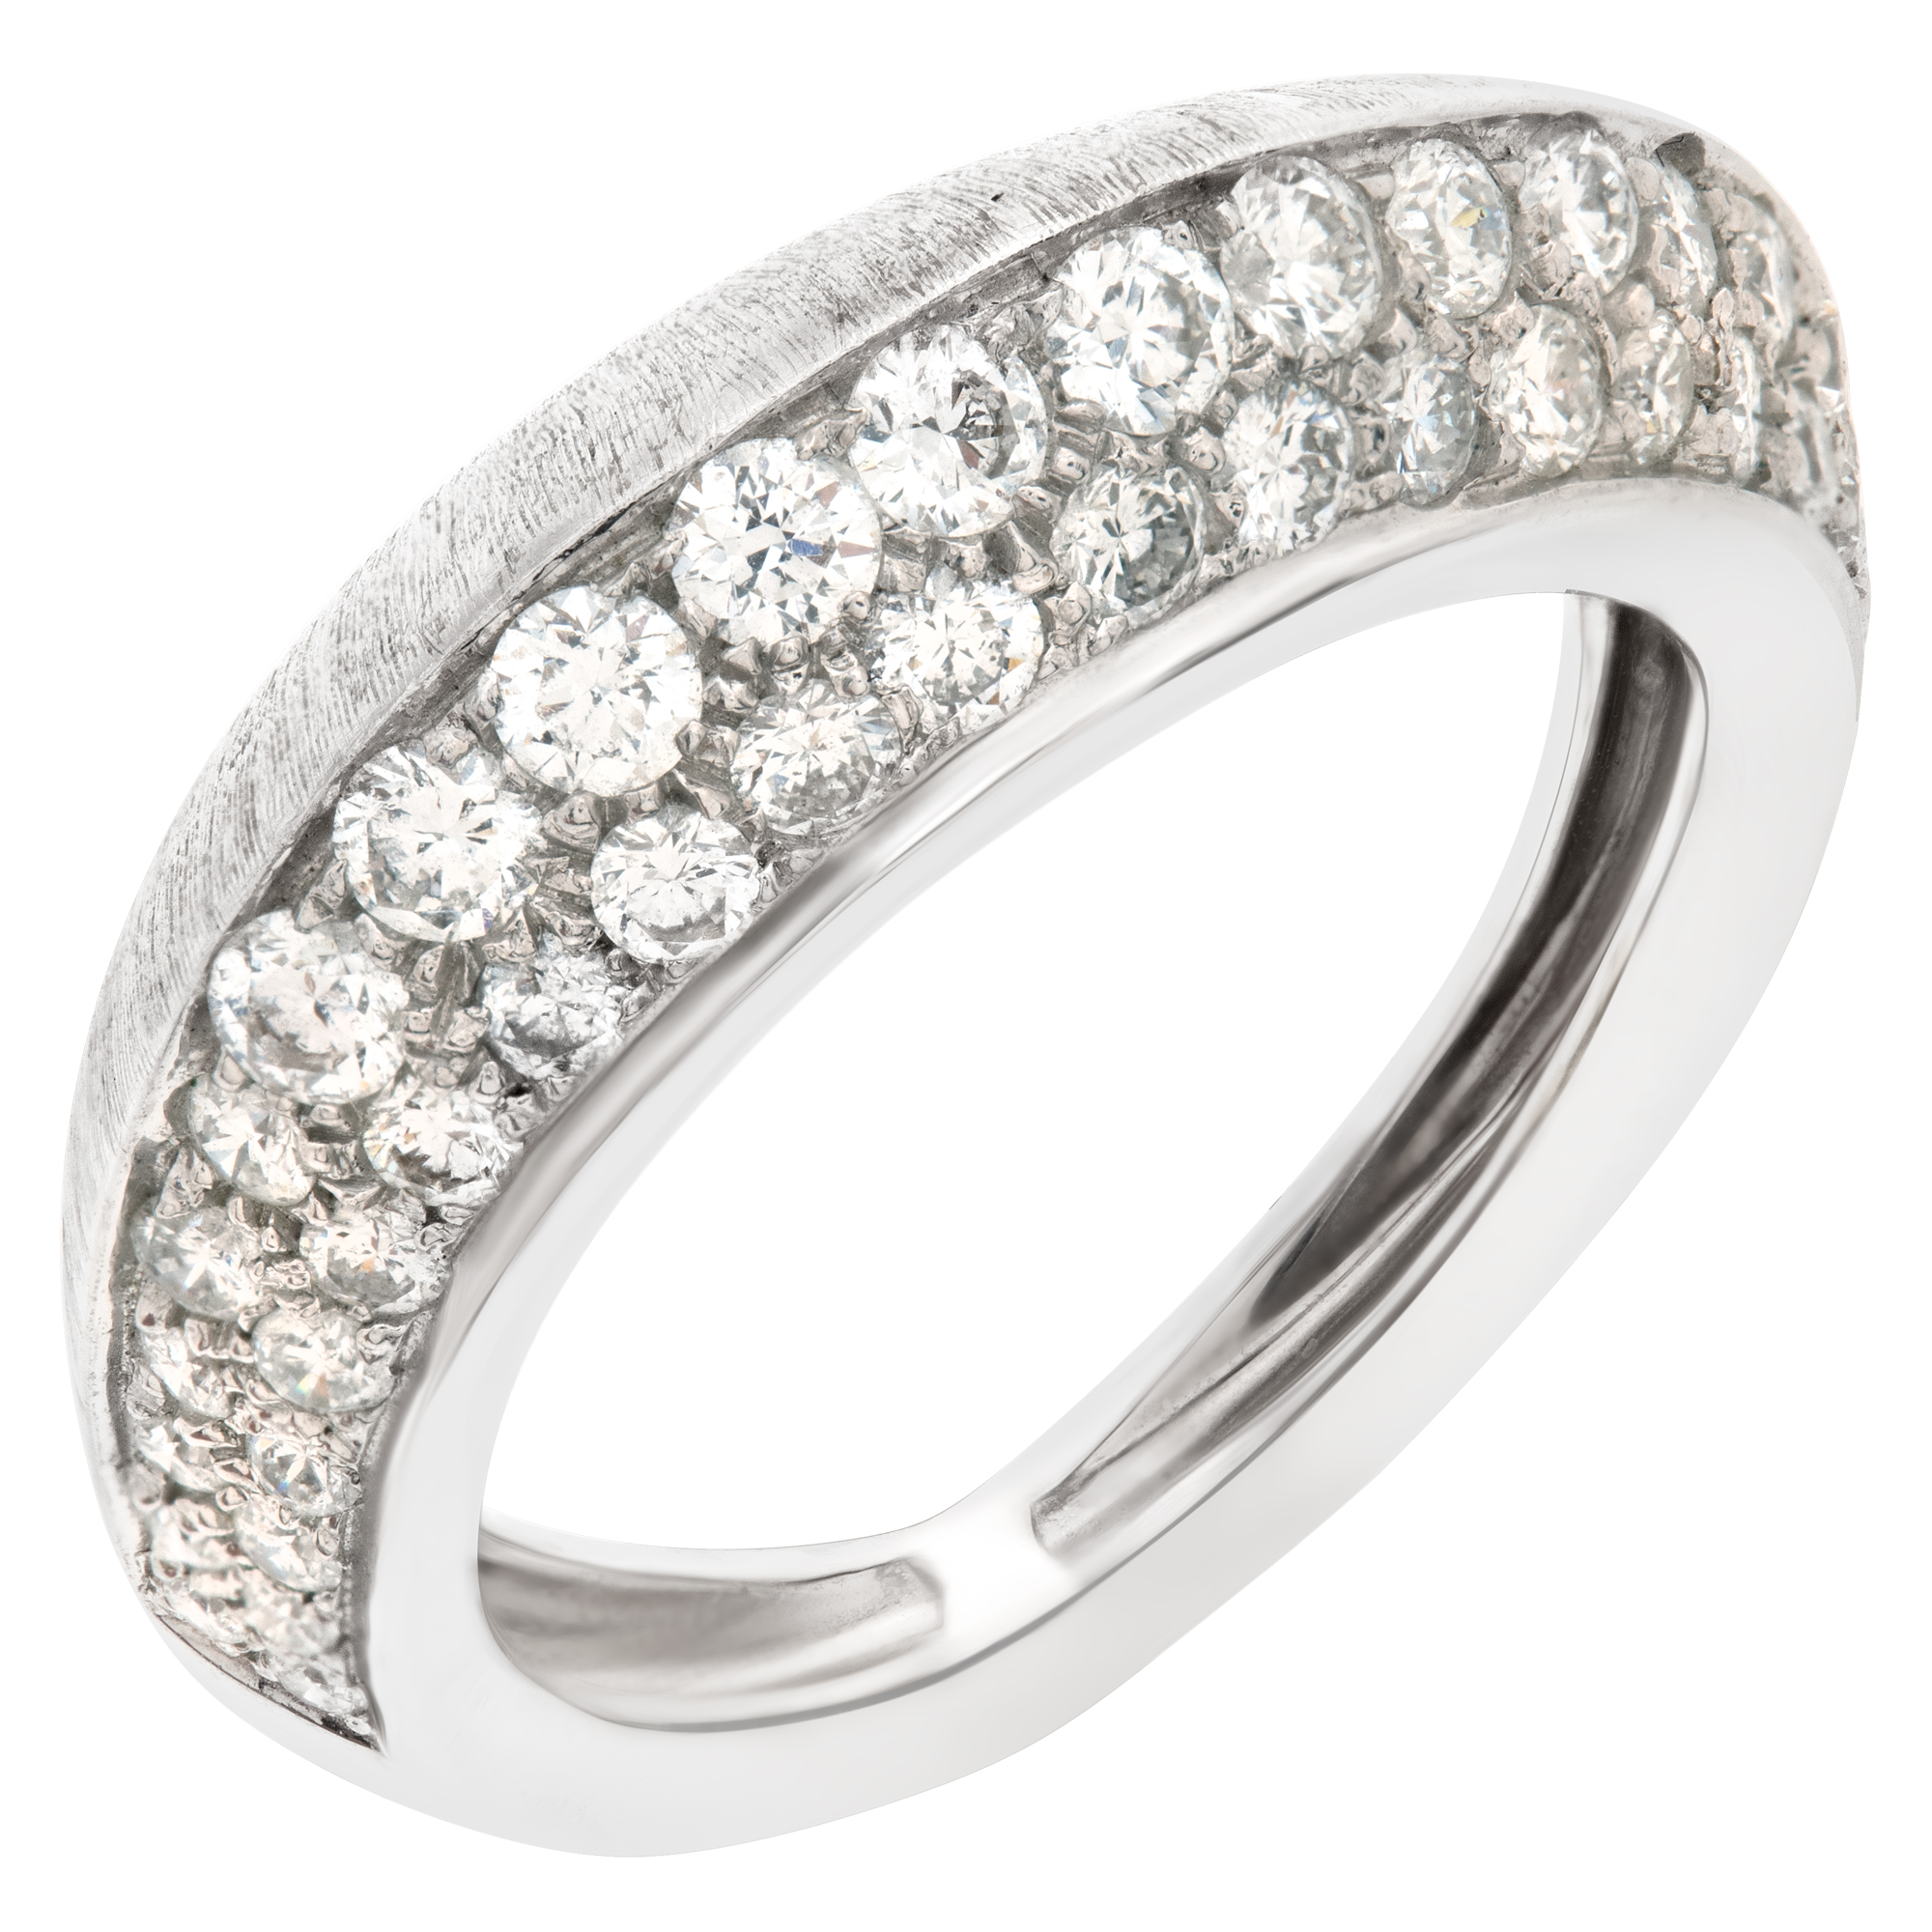 Domed diamond ring in 18k matte white gold. 1.00 carats in diamonds. Size 6 image 3